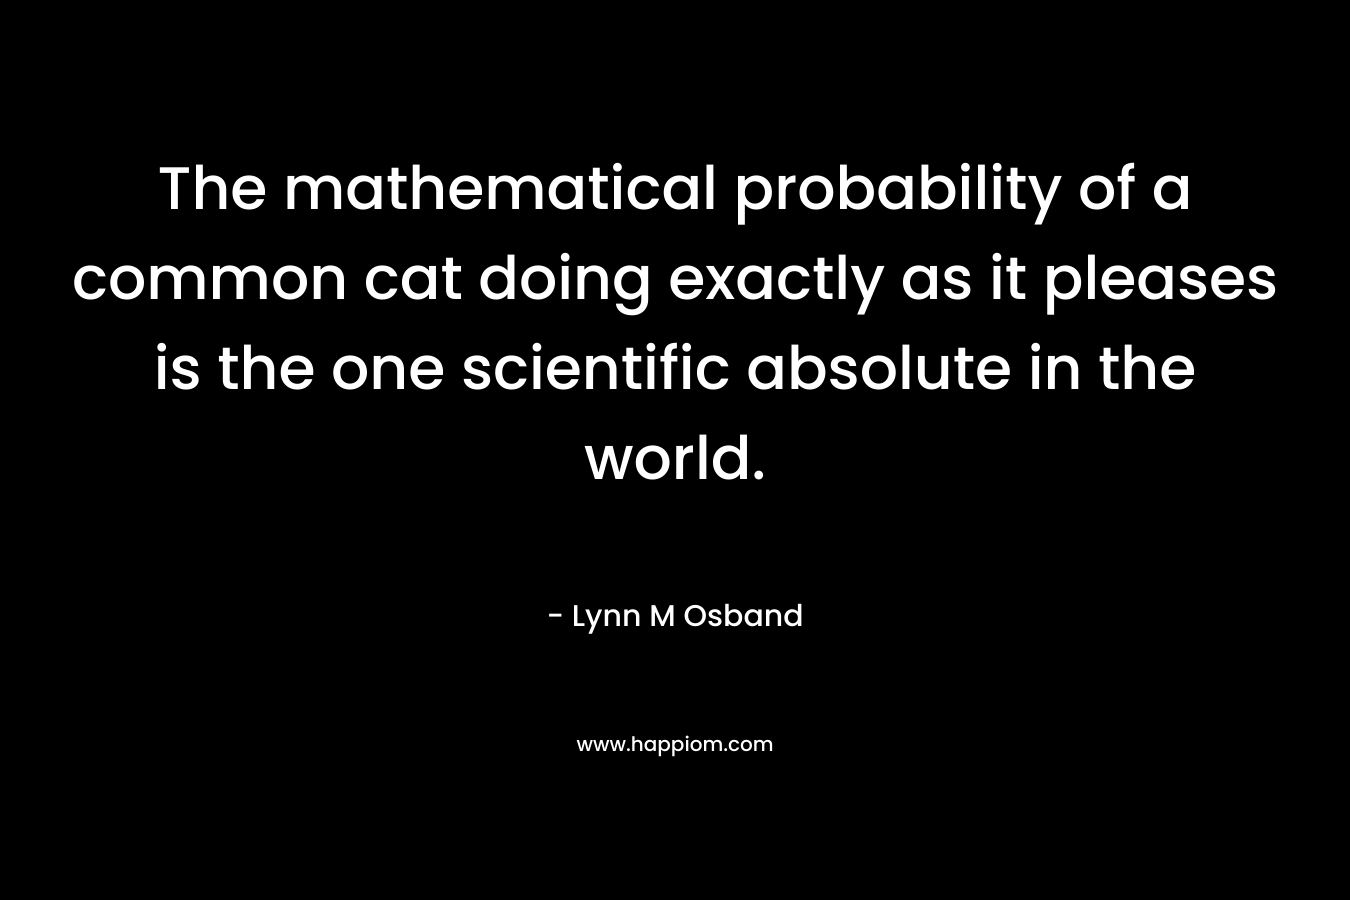 The mathematical probability of a common cat doing exactly as it pleases is the one scientific absolute in the world. – Lynn M Osband